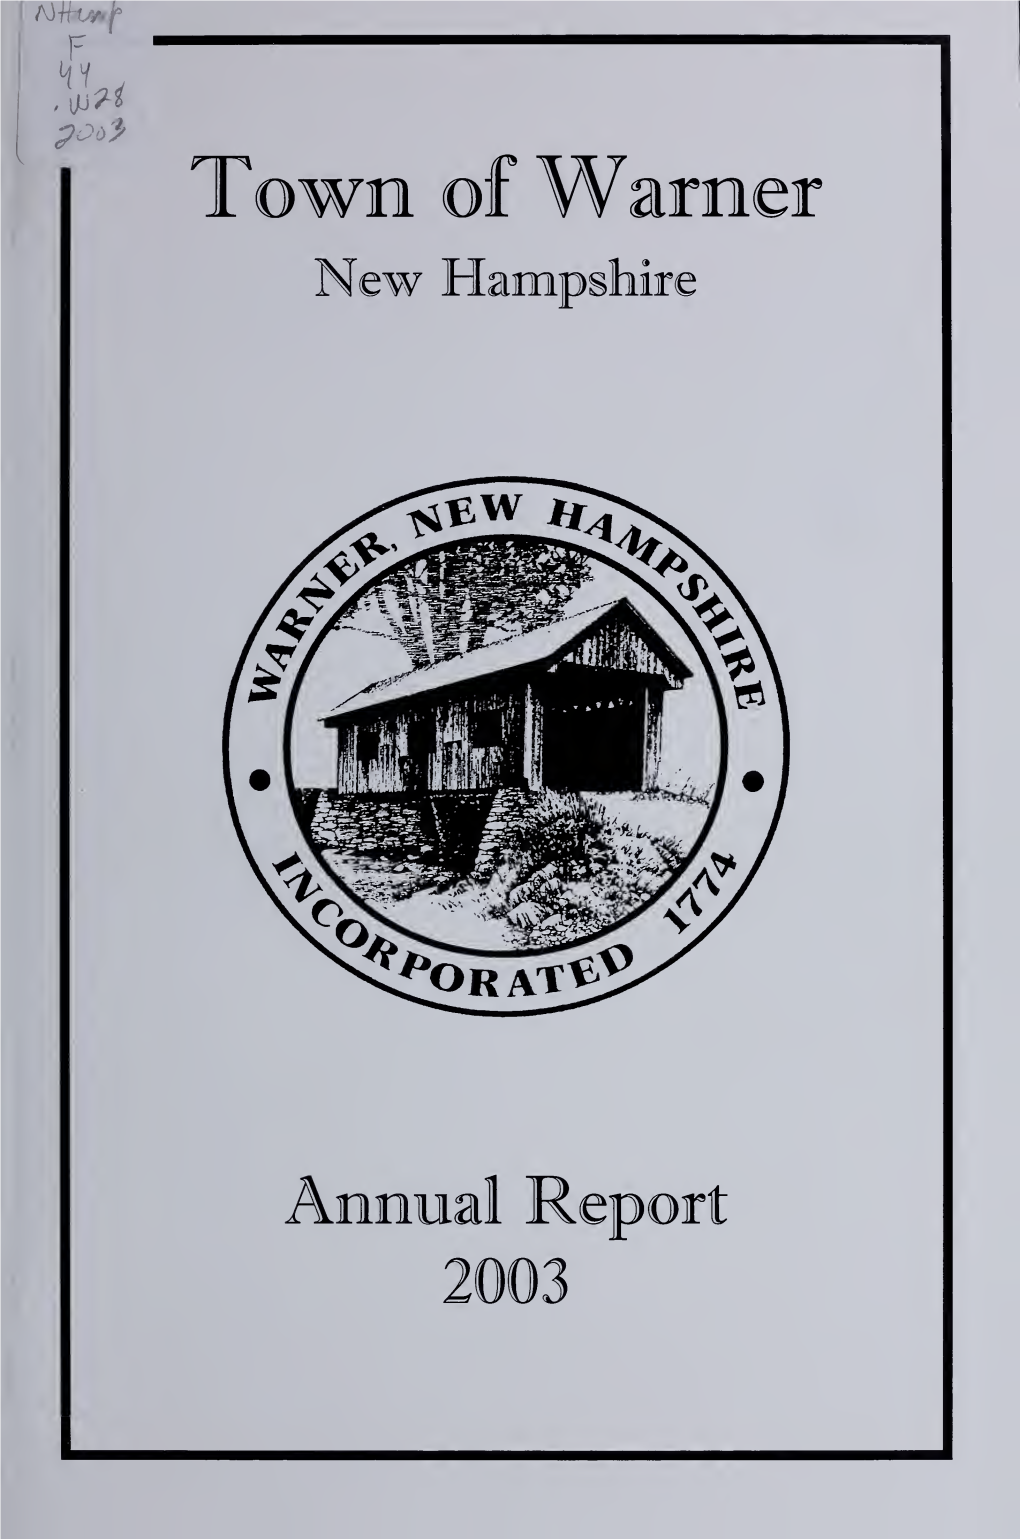 Annual Report of the Town of Warner, New Hampshire